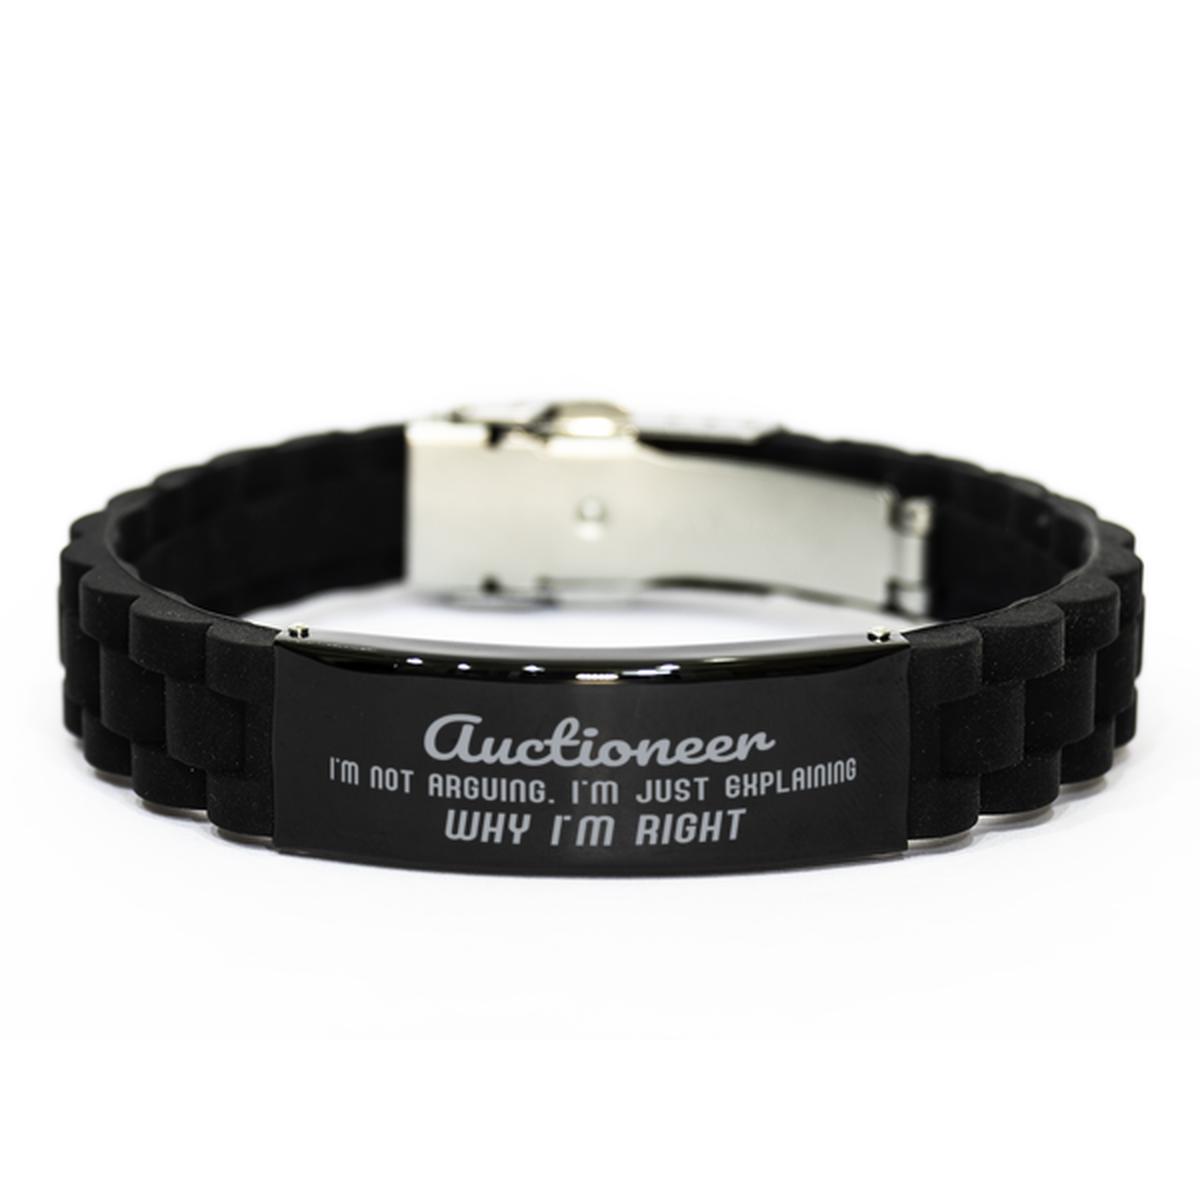 Auctioneer I'm not Arguing. I'm Just Explaining Why I'm RIGHT Black Glidelock Clasp Bracelet, Funny Saying Quote Auctioneer Gifts For Auctioneer Graduation Birthday Christmas Gifts for Men Women Coworker